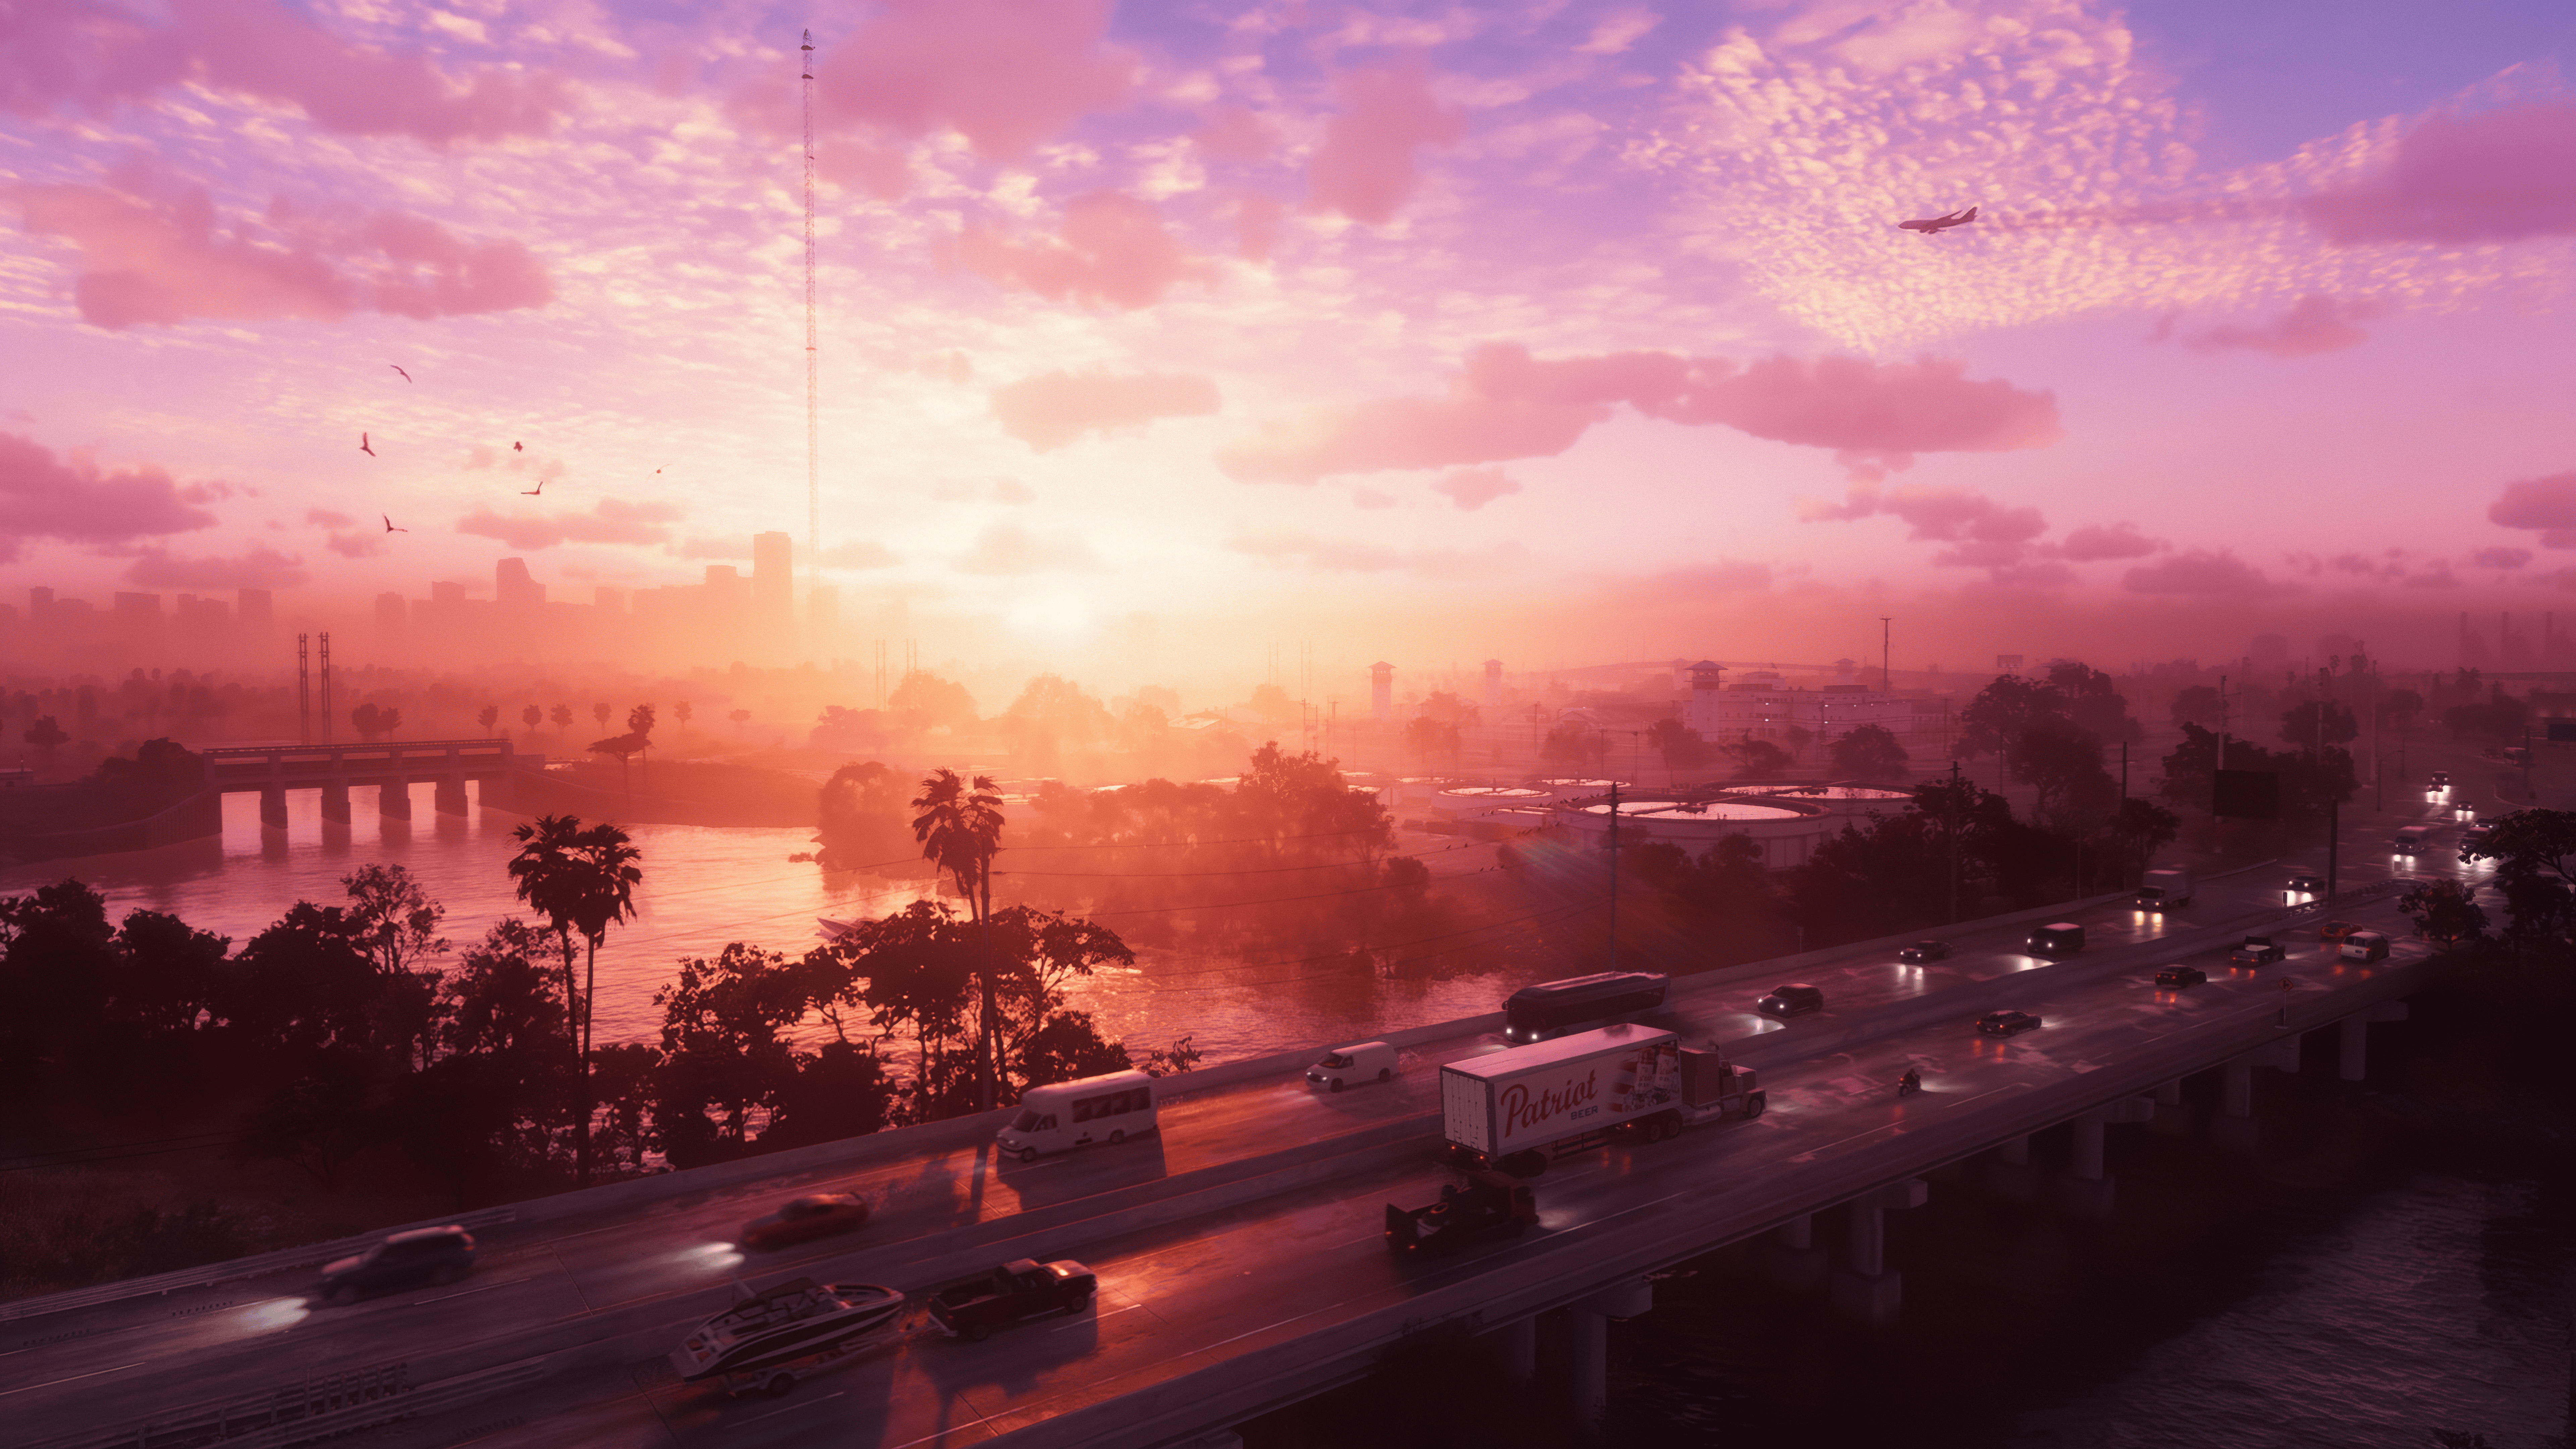 General 7680x4320 Rockstar Games Grand Theft Auto VI Vice City landscape sunset sunset glow highway Grand Theft Auto digital art video game art sky sunlight road headlights taillights car bridge clouds palm trees water driving airplane video games